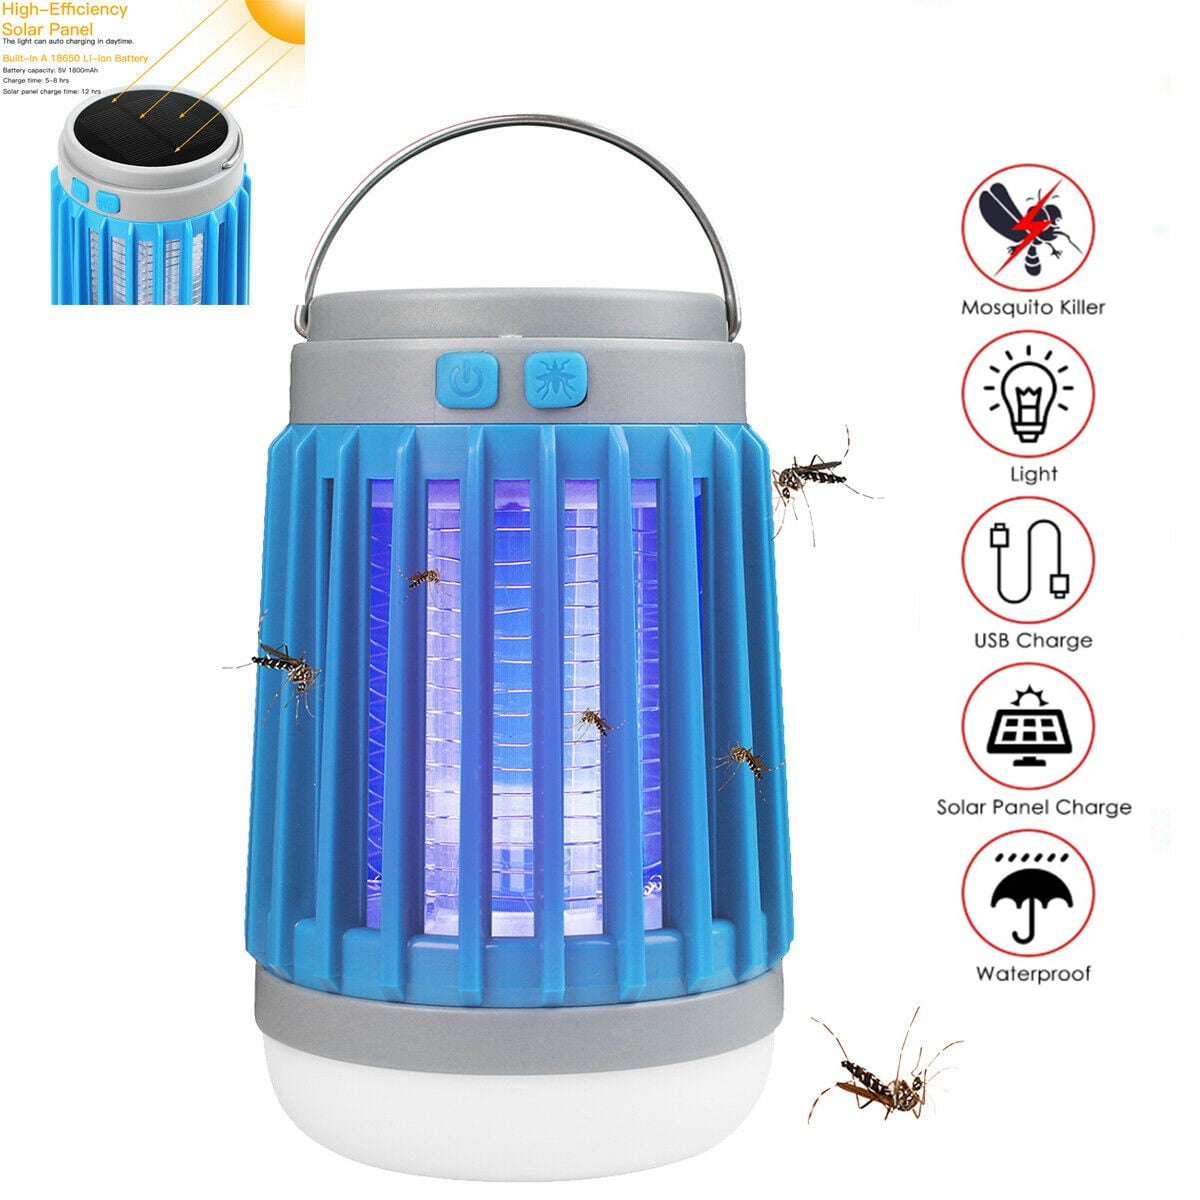 Camping Lamp Electric Mosquito Killer Lamp Usb Rechargeable Tent Light for Bedroom Living Room Office Hiking Fishing Portable Bug Zapper Fly Killer Insect Killer with Night Light 